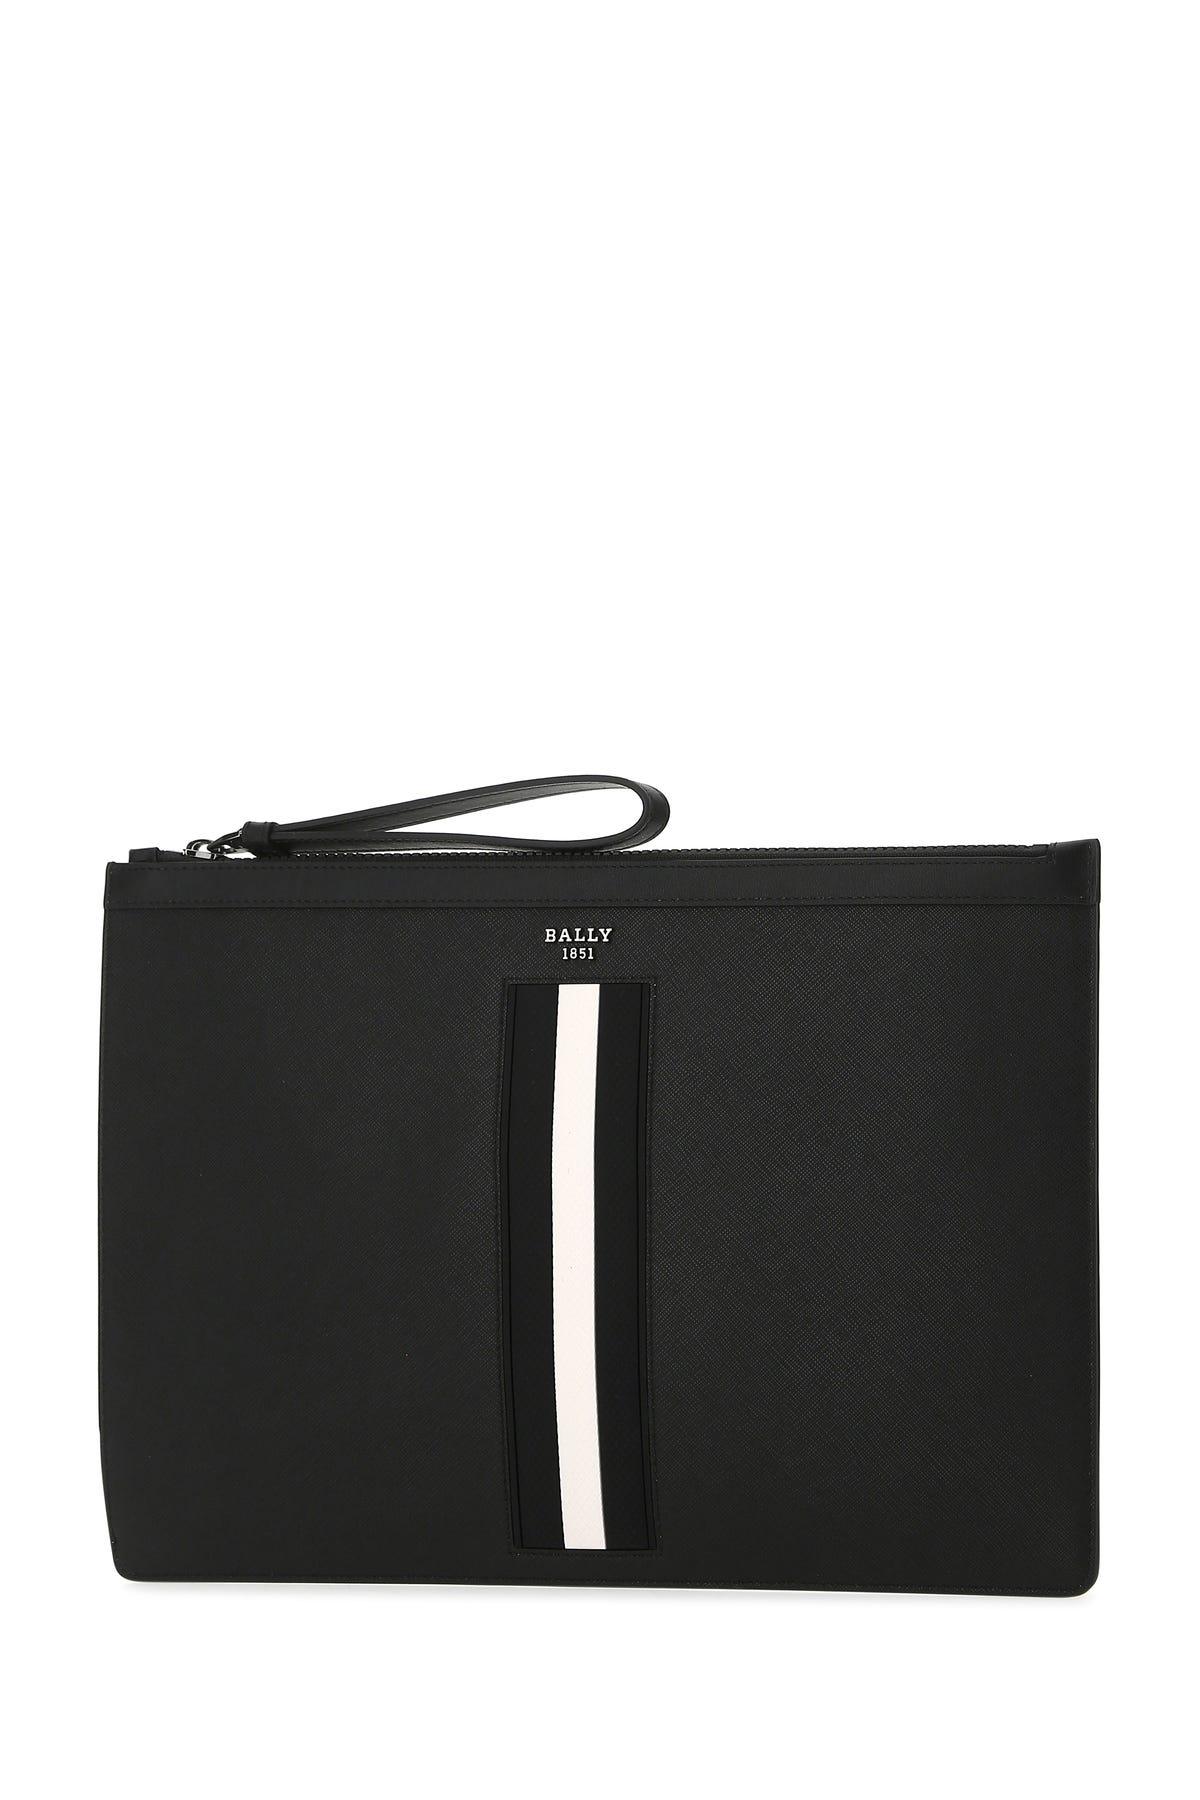 BALLY: Cayard clutch bag in canvas and leather with striped band - Black